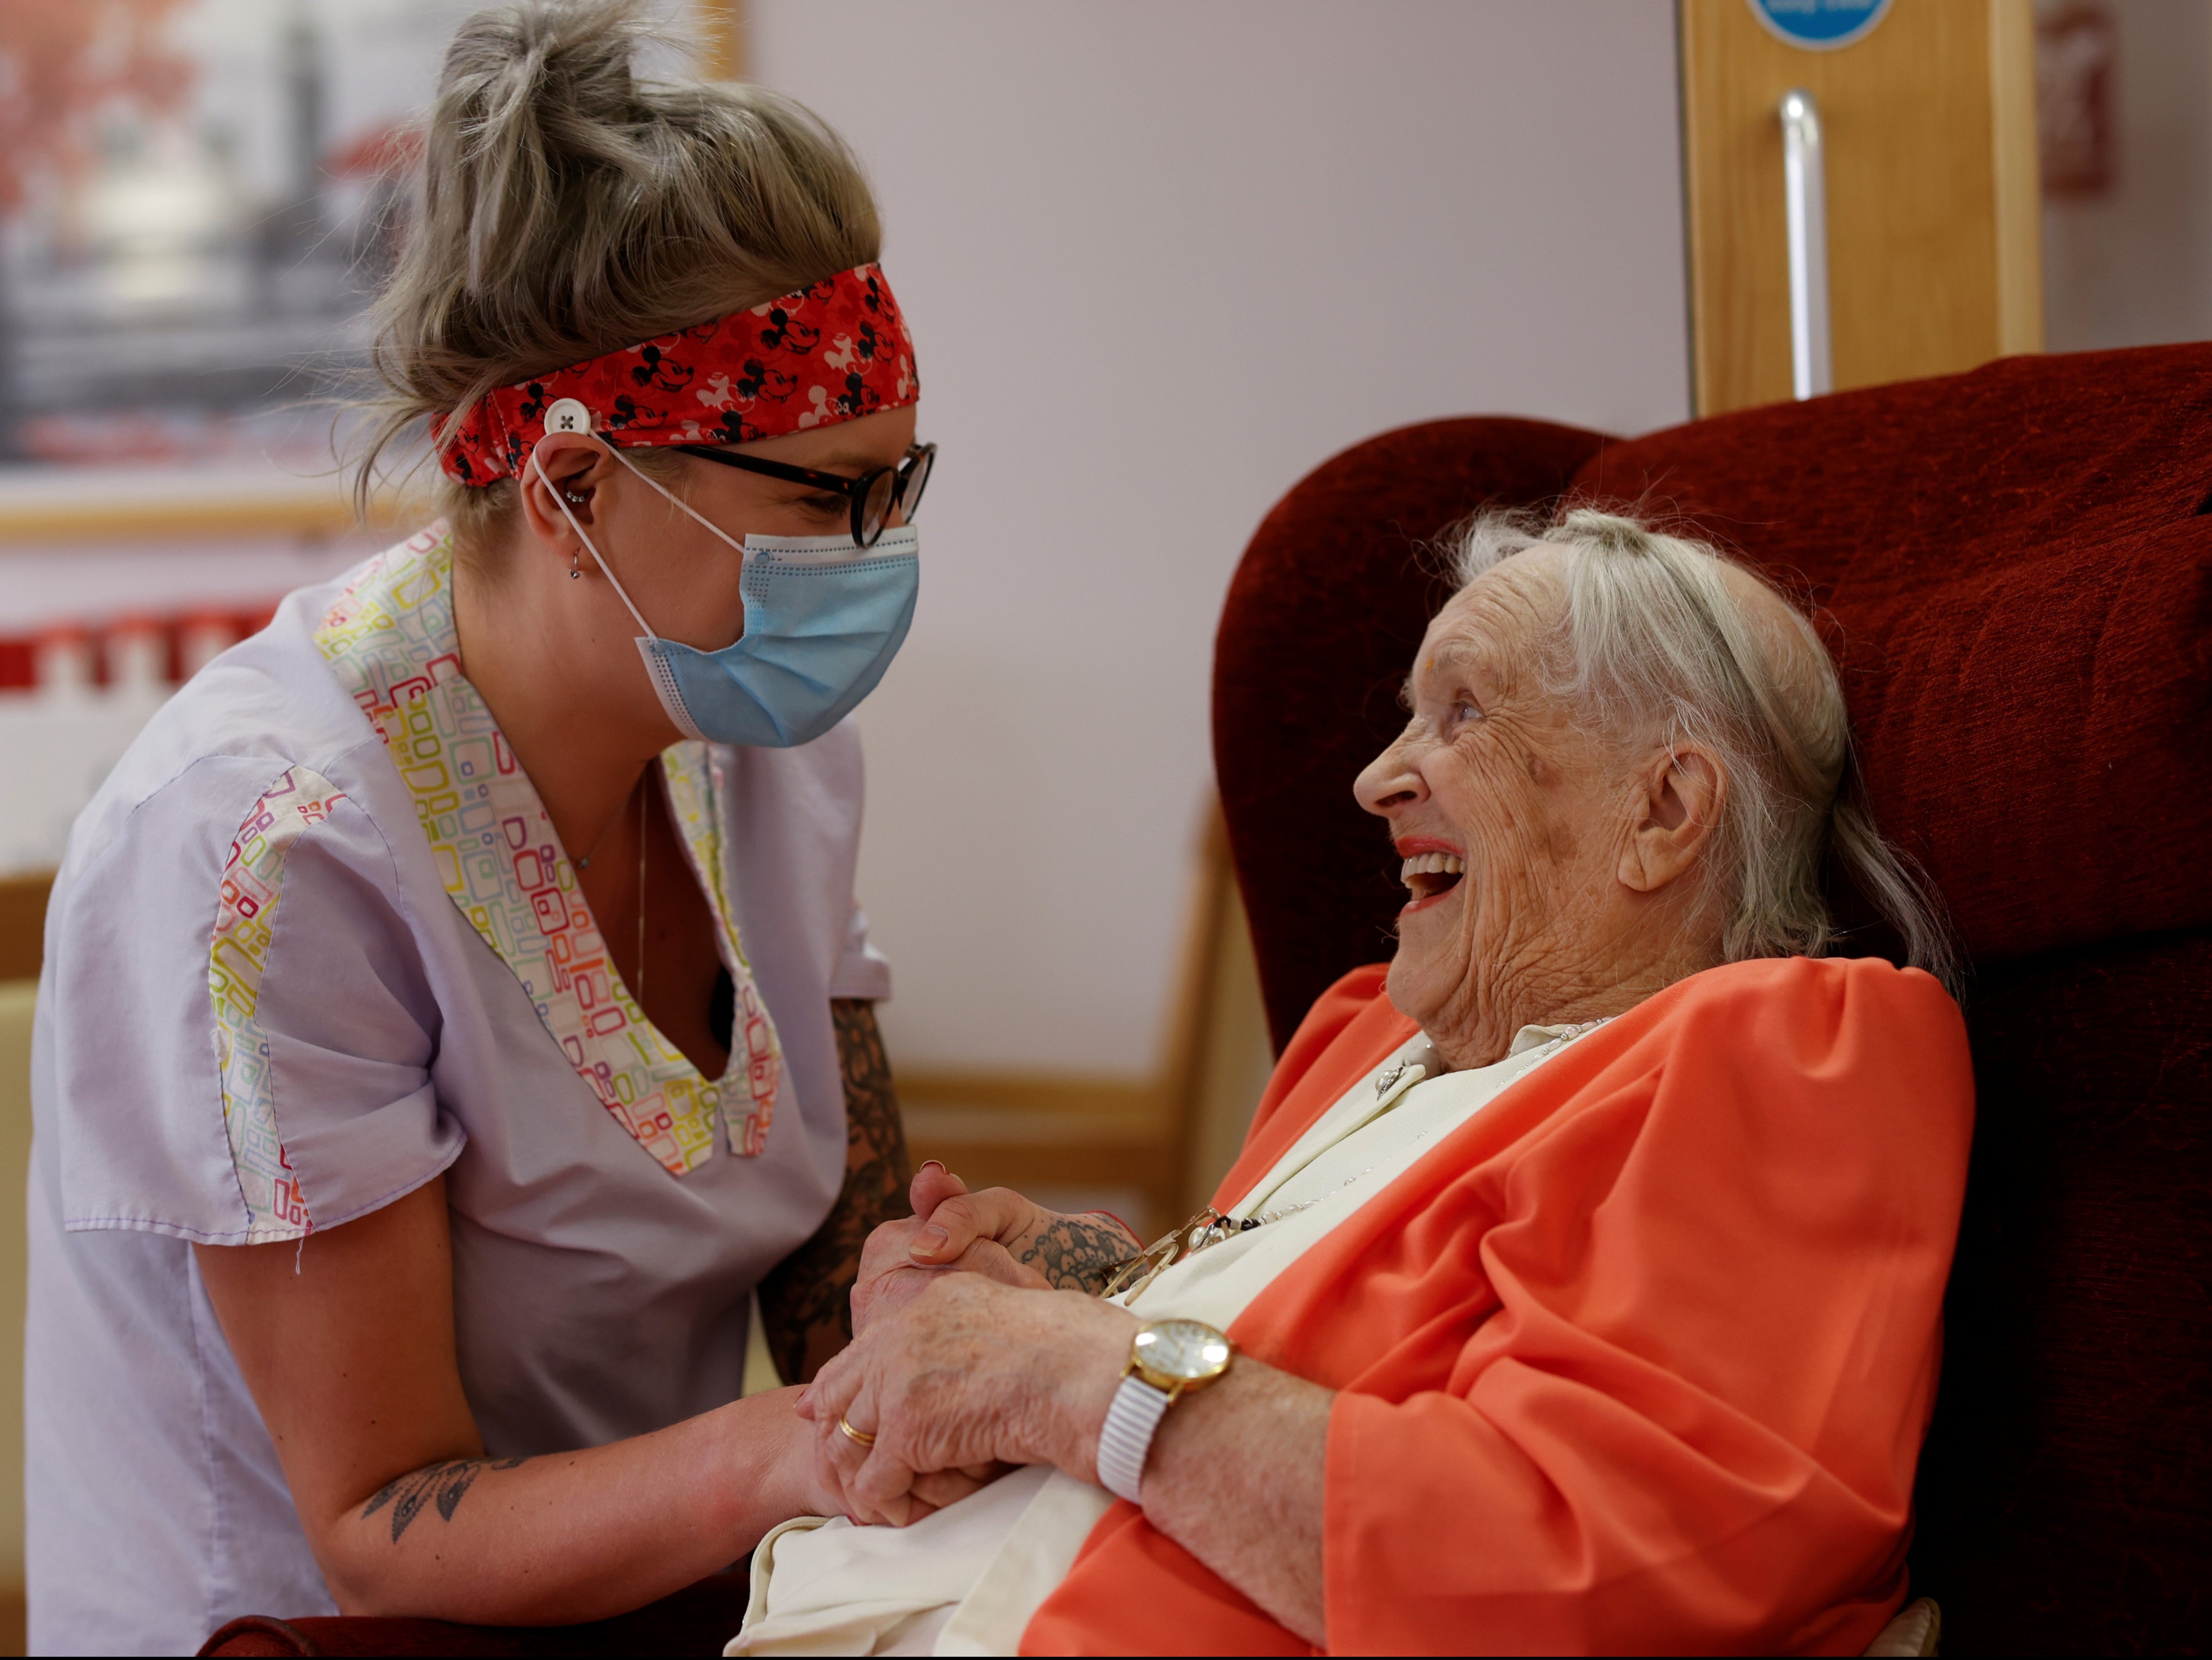 Carer Lucy Skidmore decided to stay on site at a care home in Princes Risoborough with six colleagues to reduce the risk of bringing Covid-19 into the home. Here she spends time with her 100-year-old great-grandmother and resident Joan Loosley